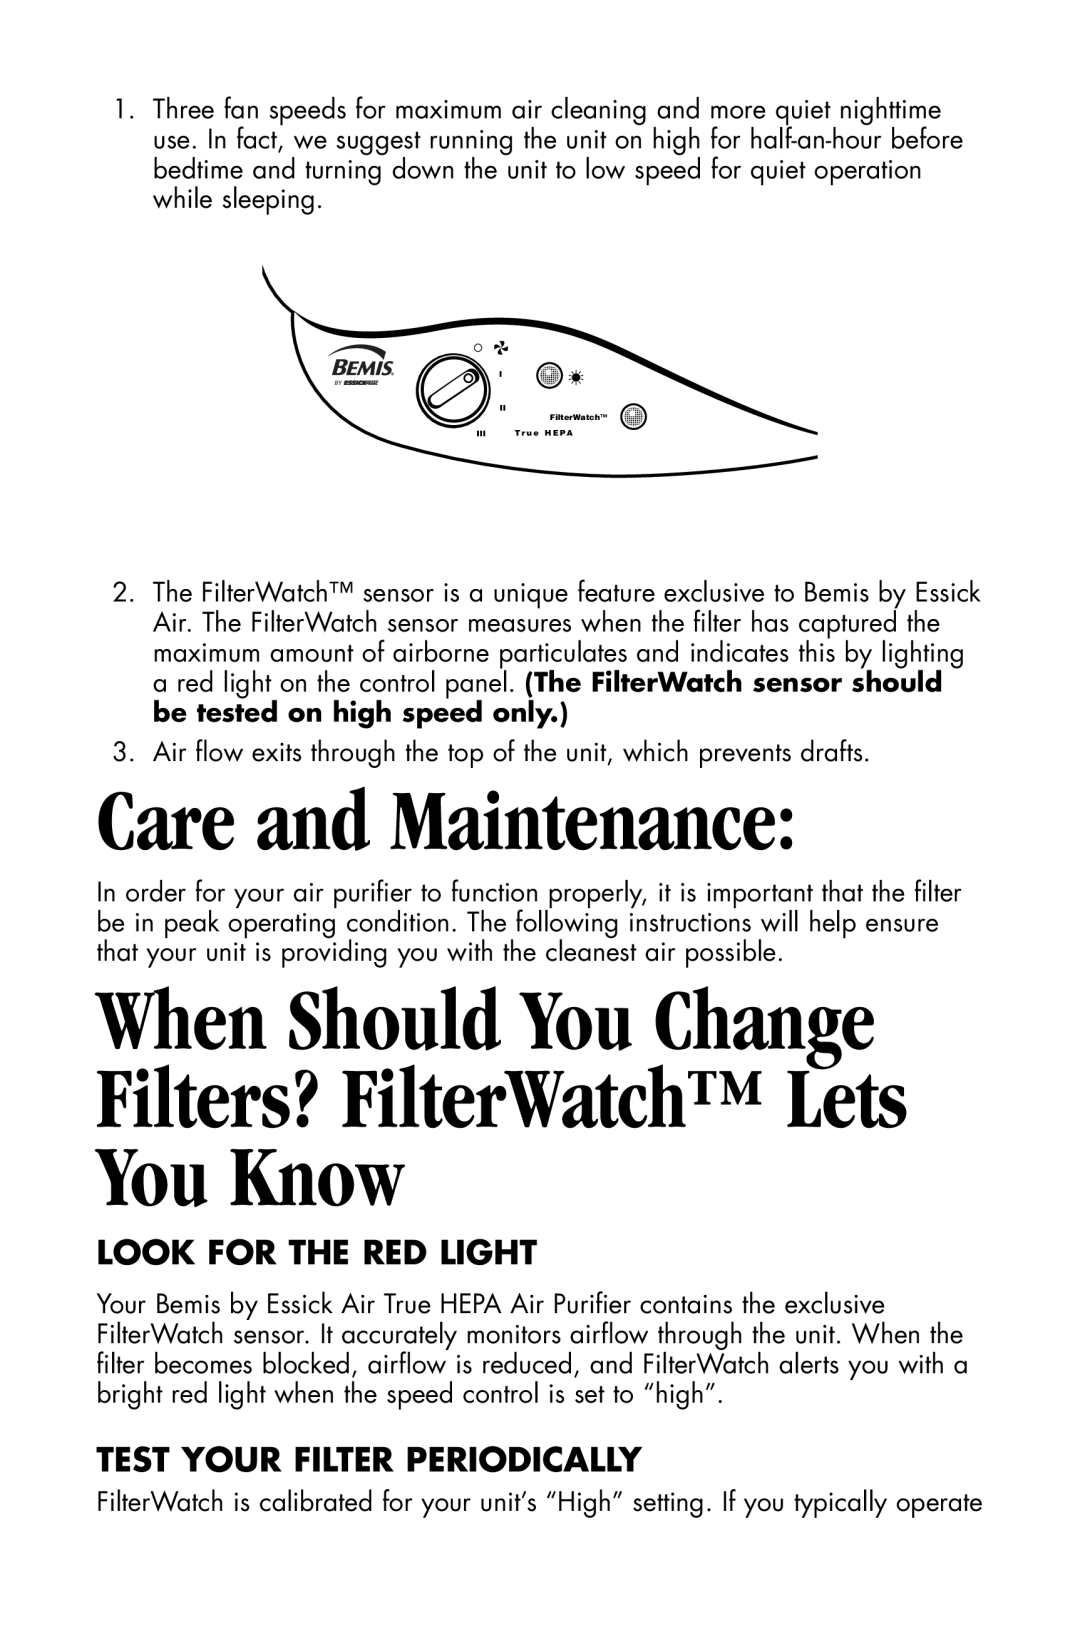 Essick Air 127-001 manual Care and Maintenance, When Should You Change, You Know, Filters? FilterWatch Lets 